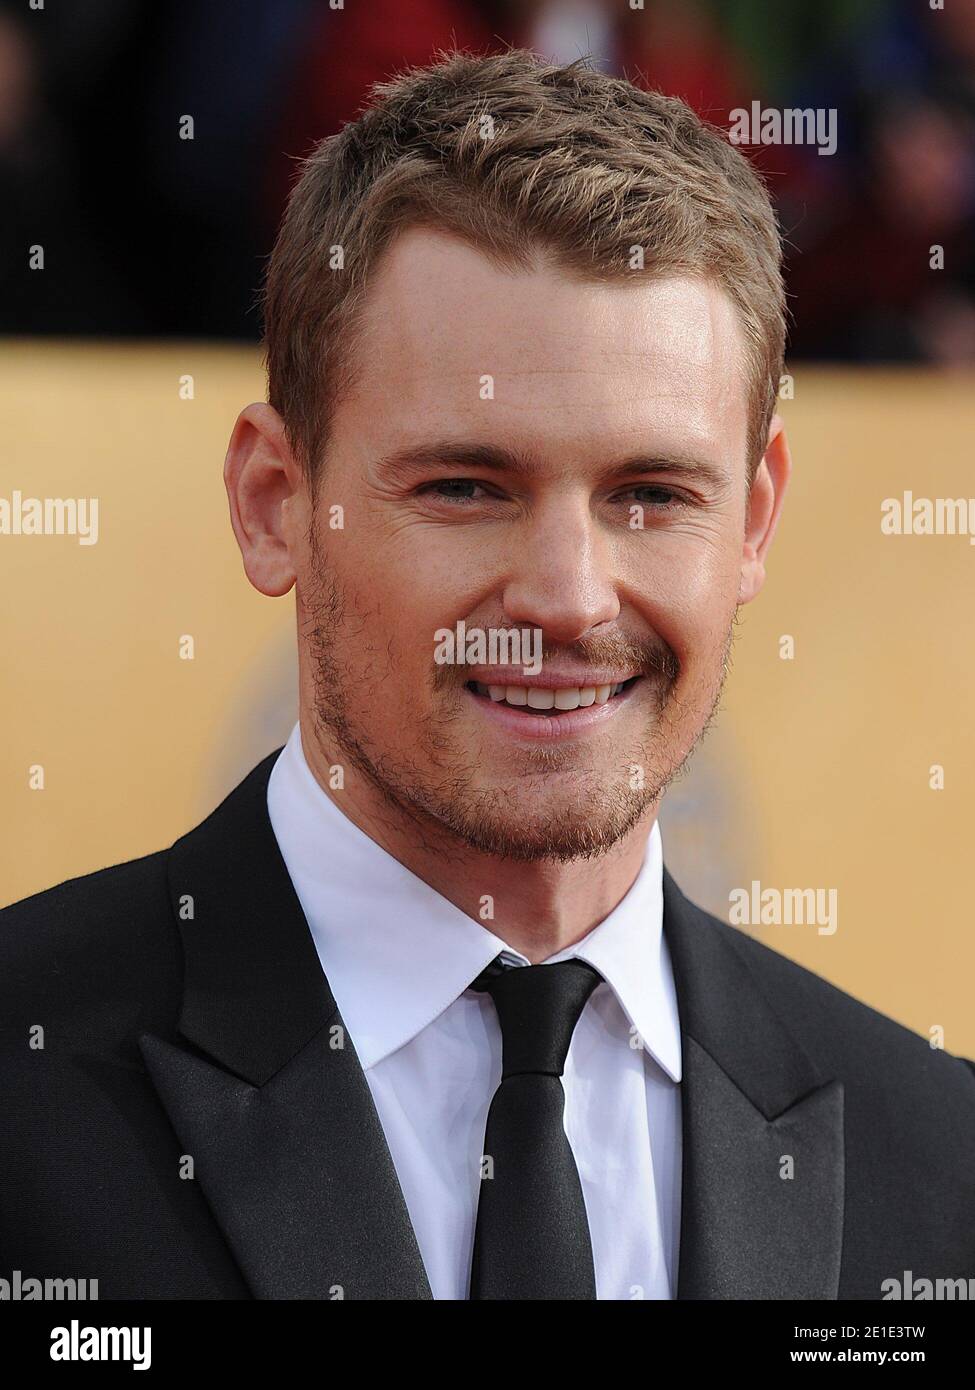 Josh Pence arriving at the 17th Annual Screen Actors Guild (SAG) Awards, held at the Shrine Exposition Center in Los Angeles, CA, USA on January 30, 2011. Photo by Lionel Hahn/ABACAPRESS.COM Stock Photo